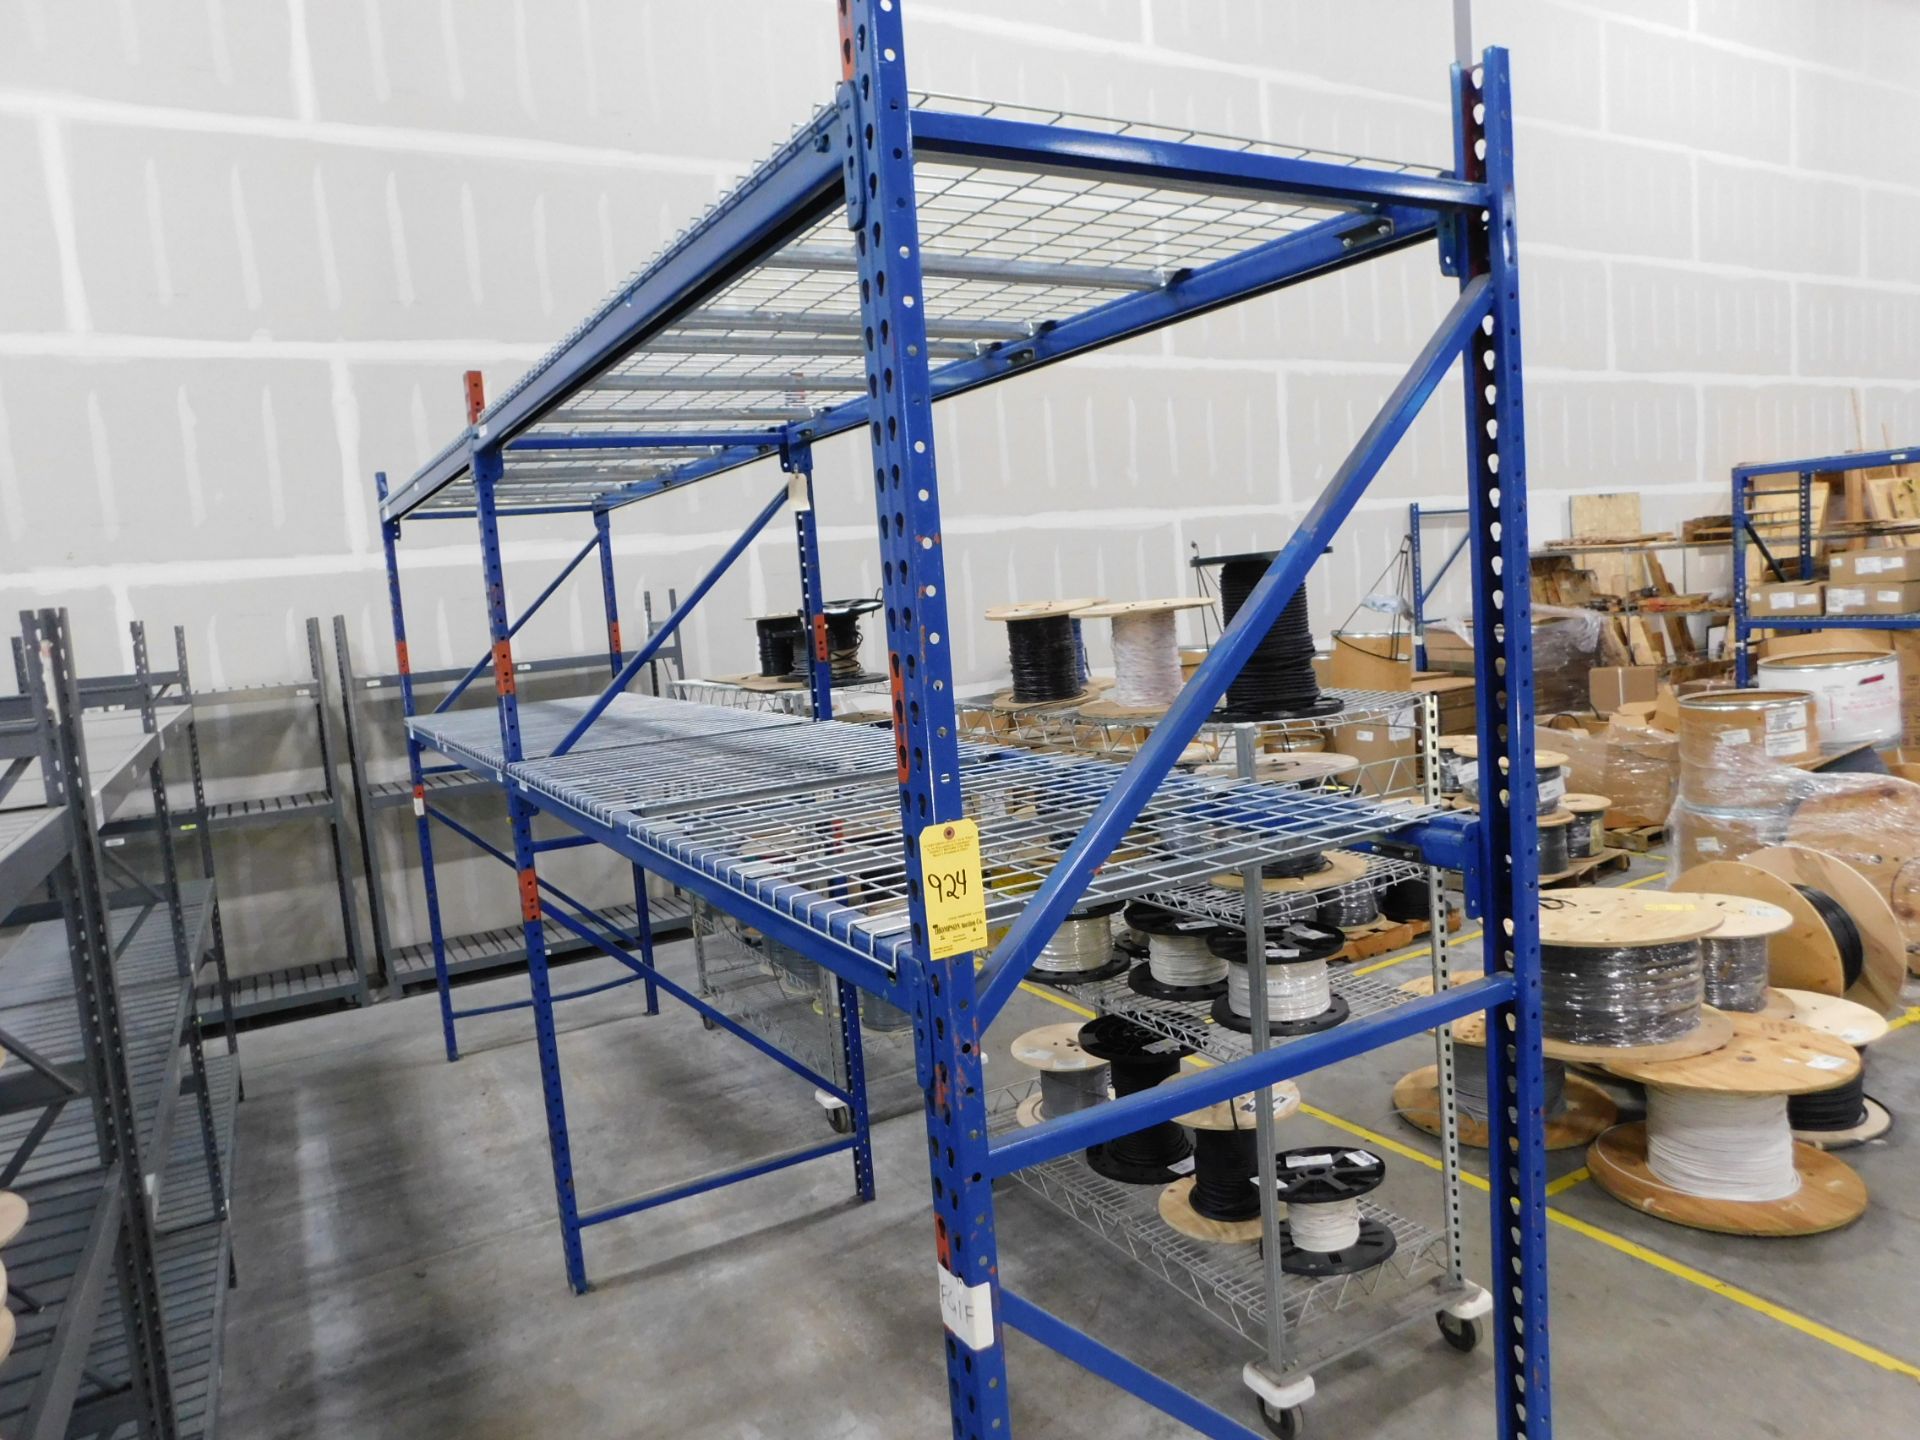 (2) Sections of Pallet Racking, 2 Shelves, 9'H x 3'D x 8'L, Wire Decking